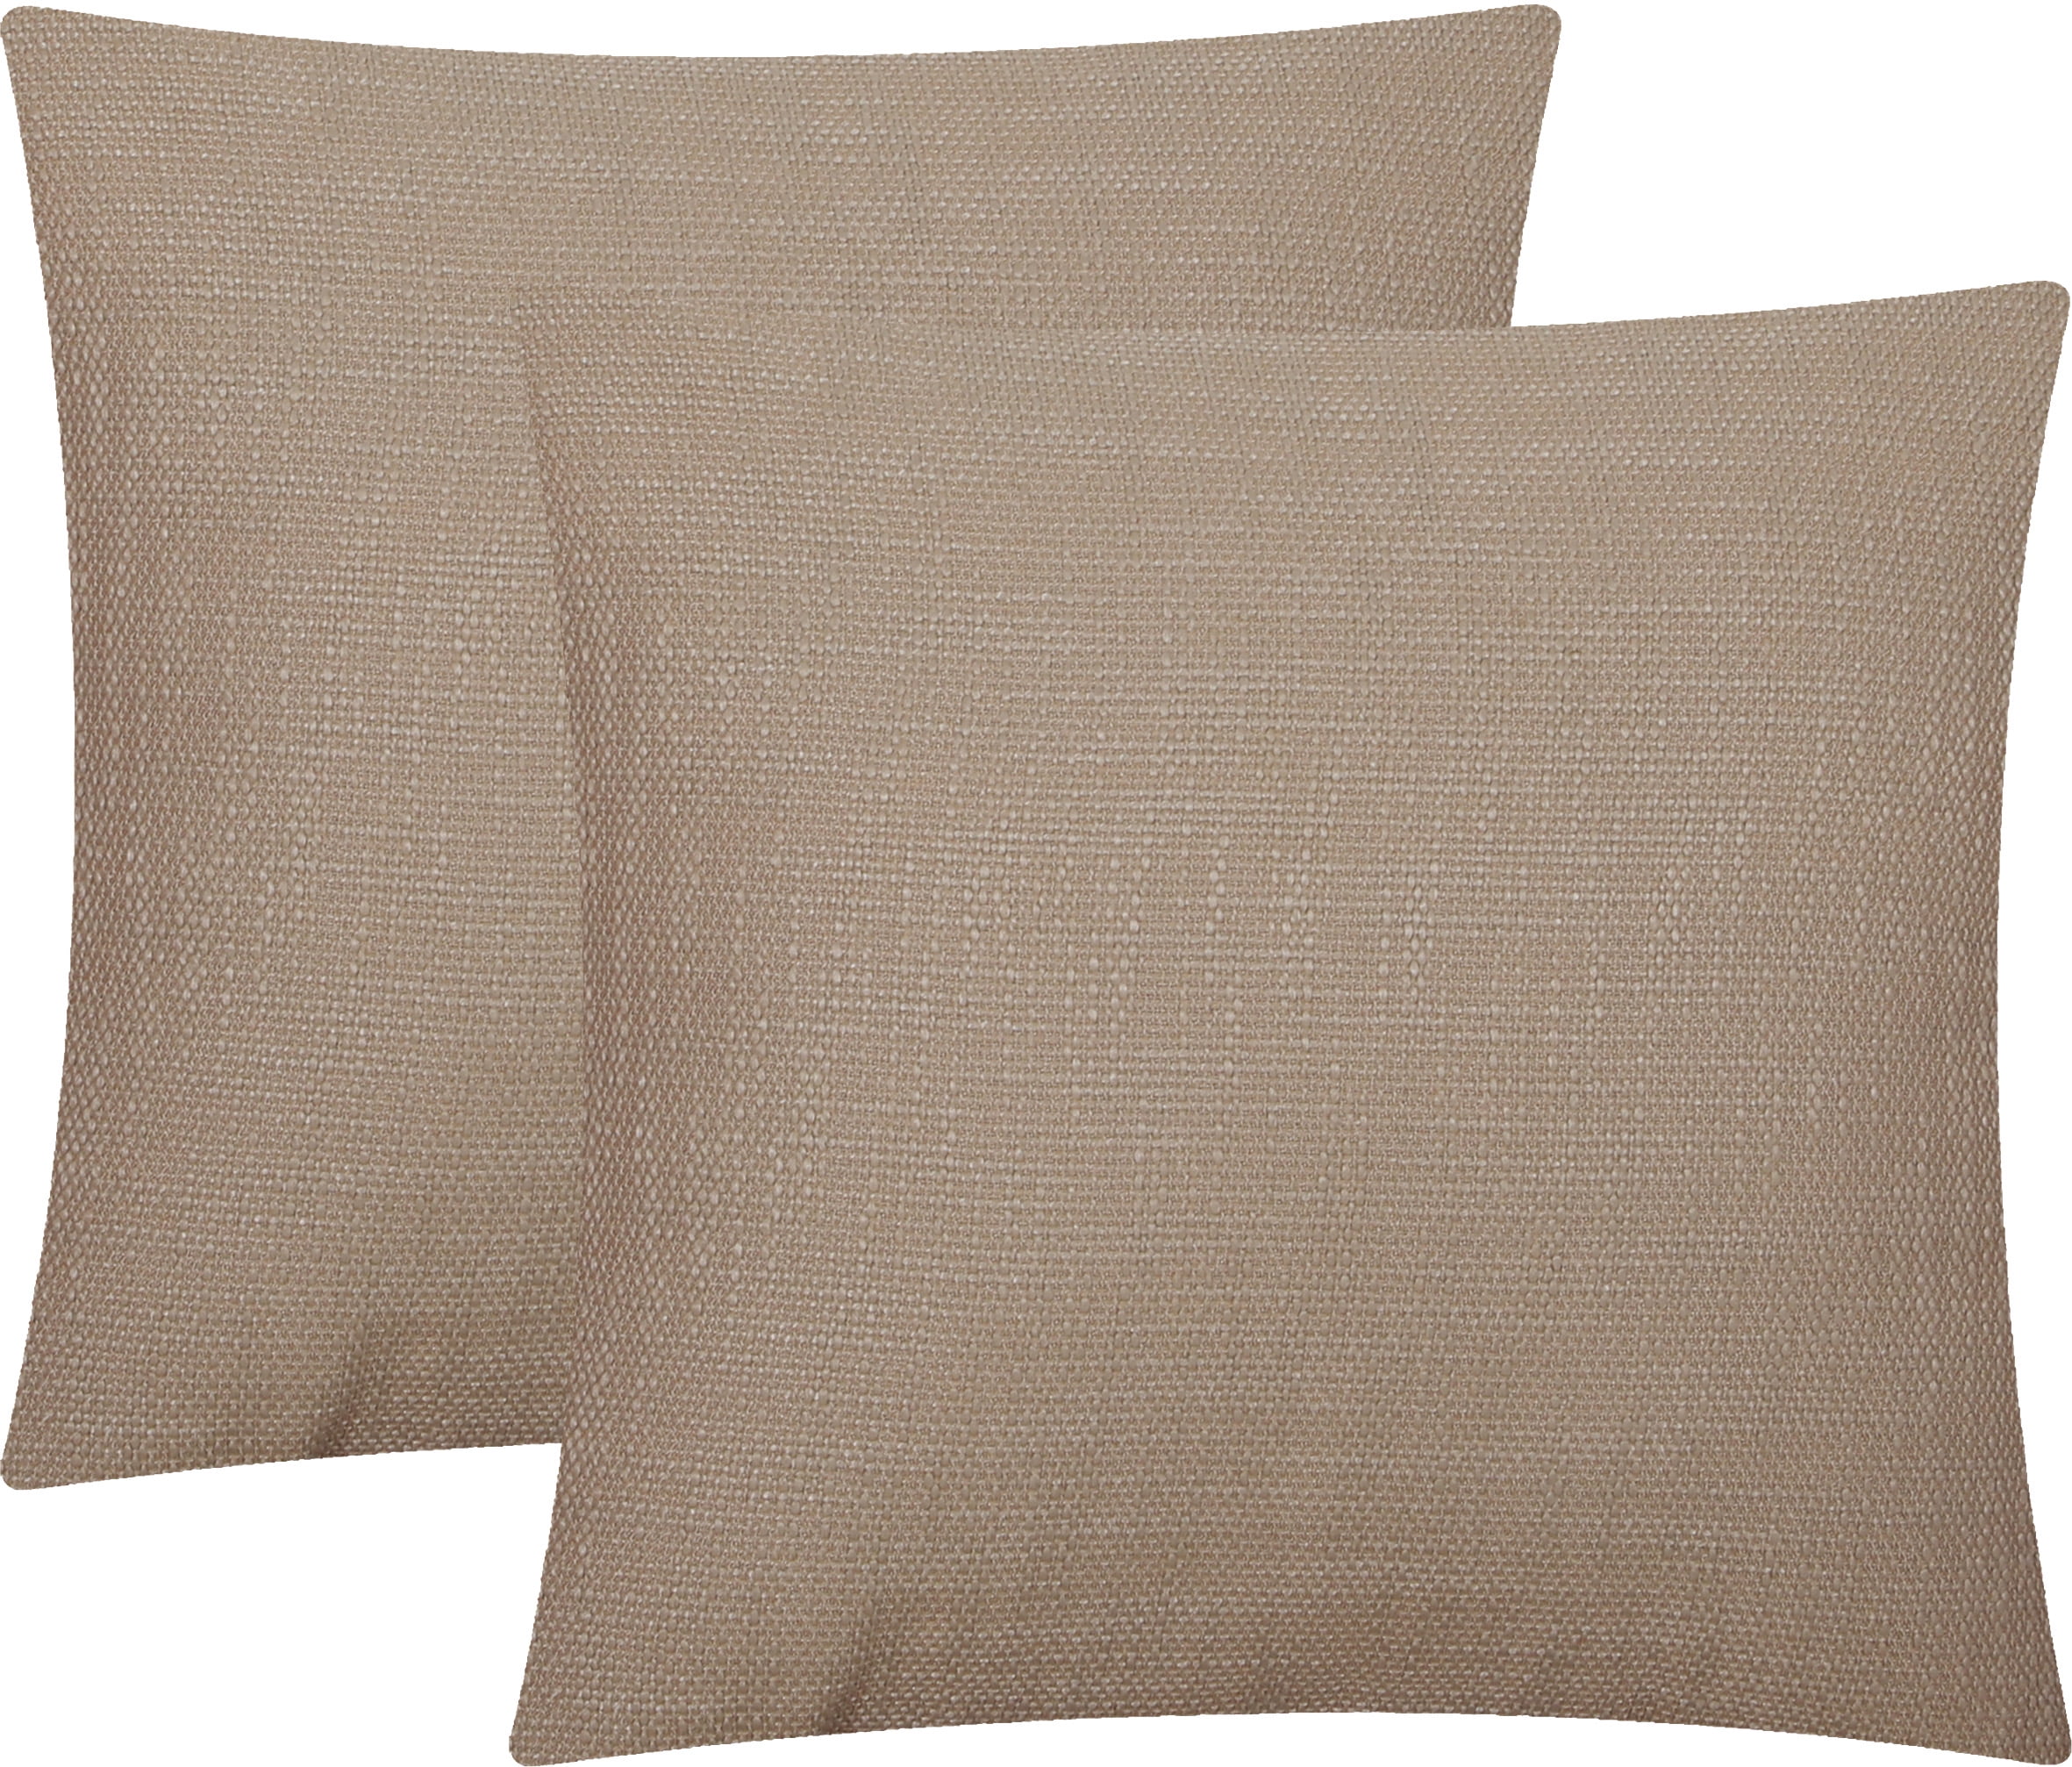 StyleWell Light Beige Abstract 18 in. x 18 in. Square Decorative Throw  Pillow with Tassels S00161061281 - The Home Depot